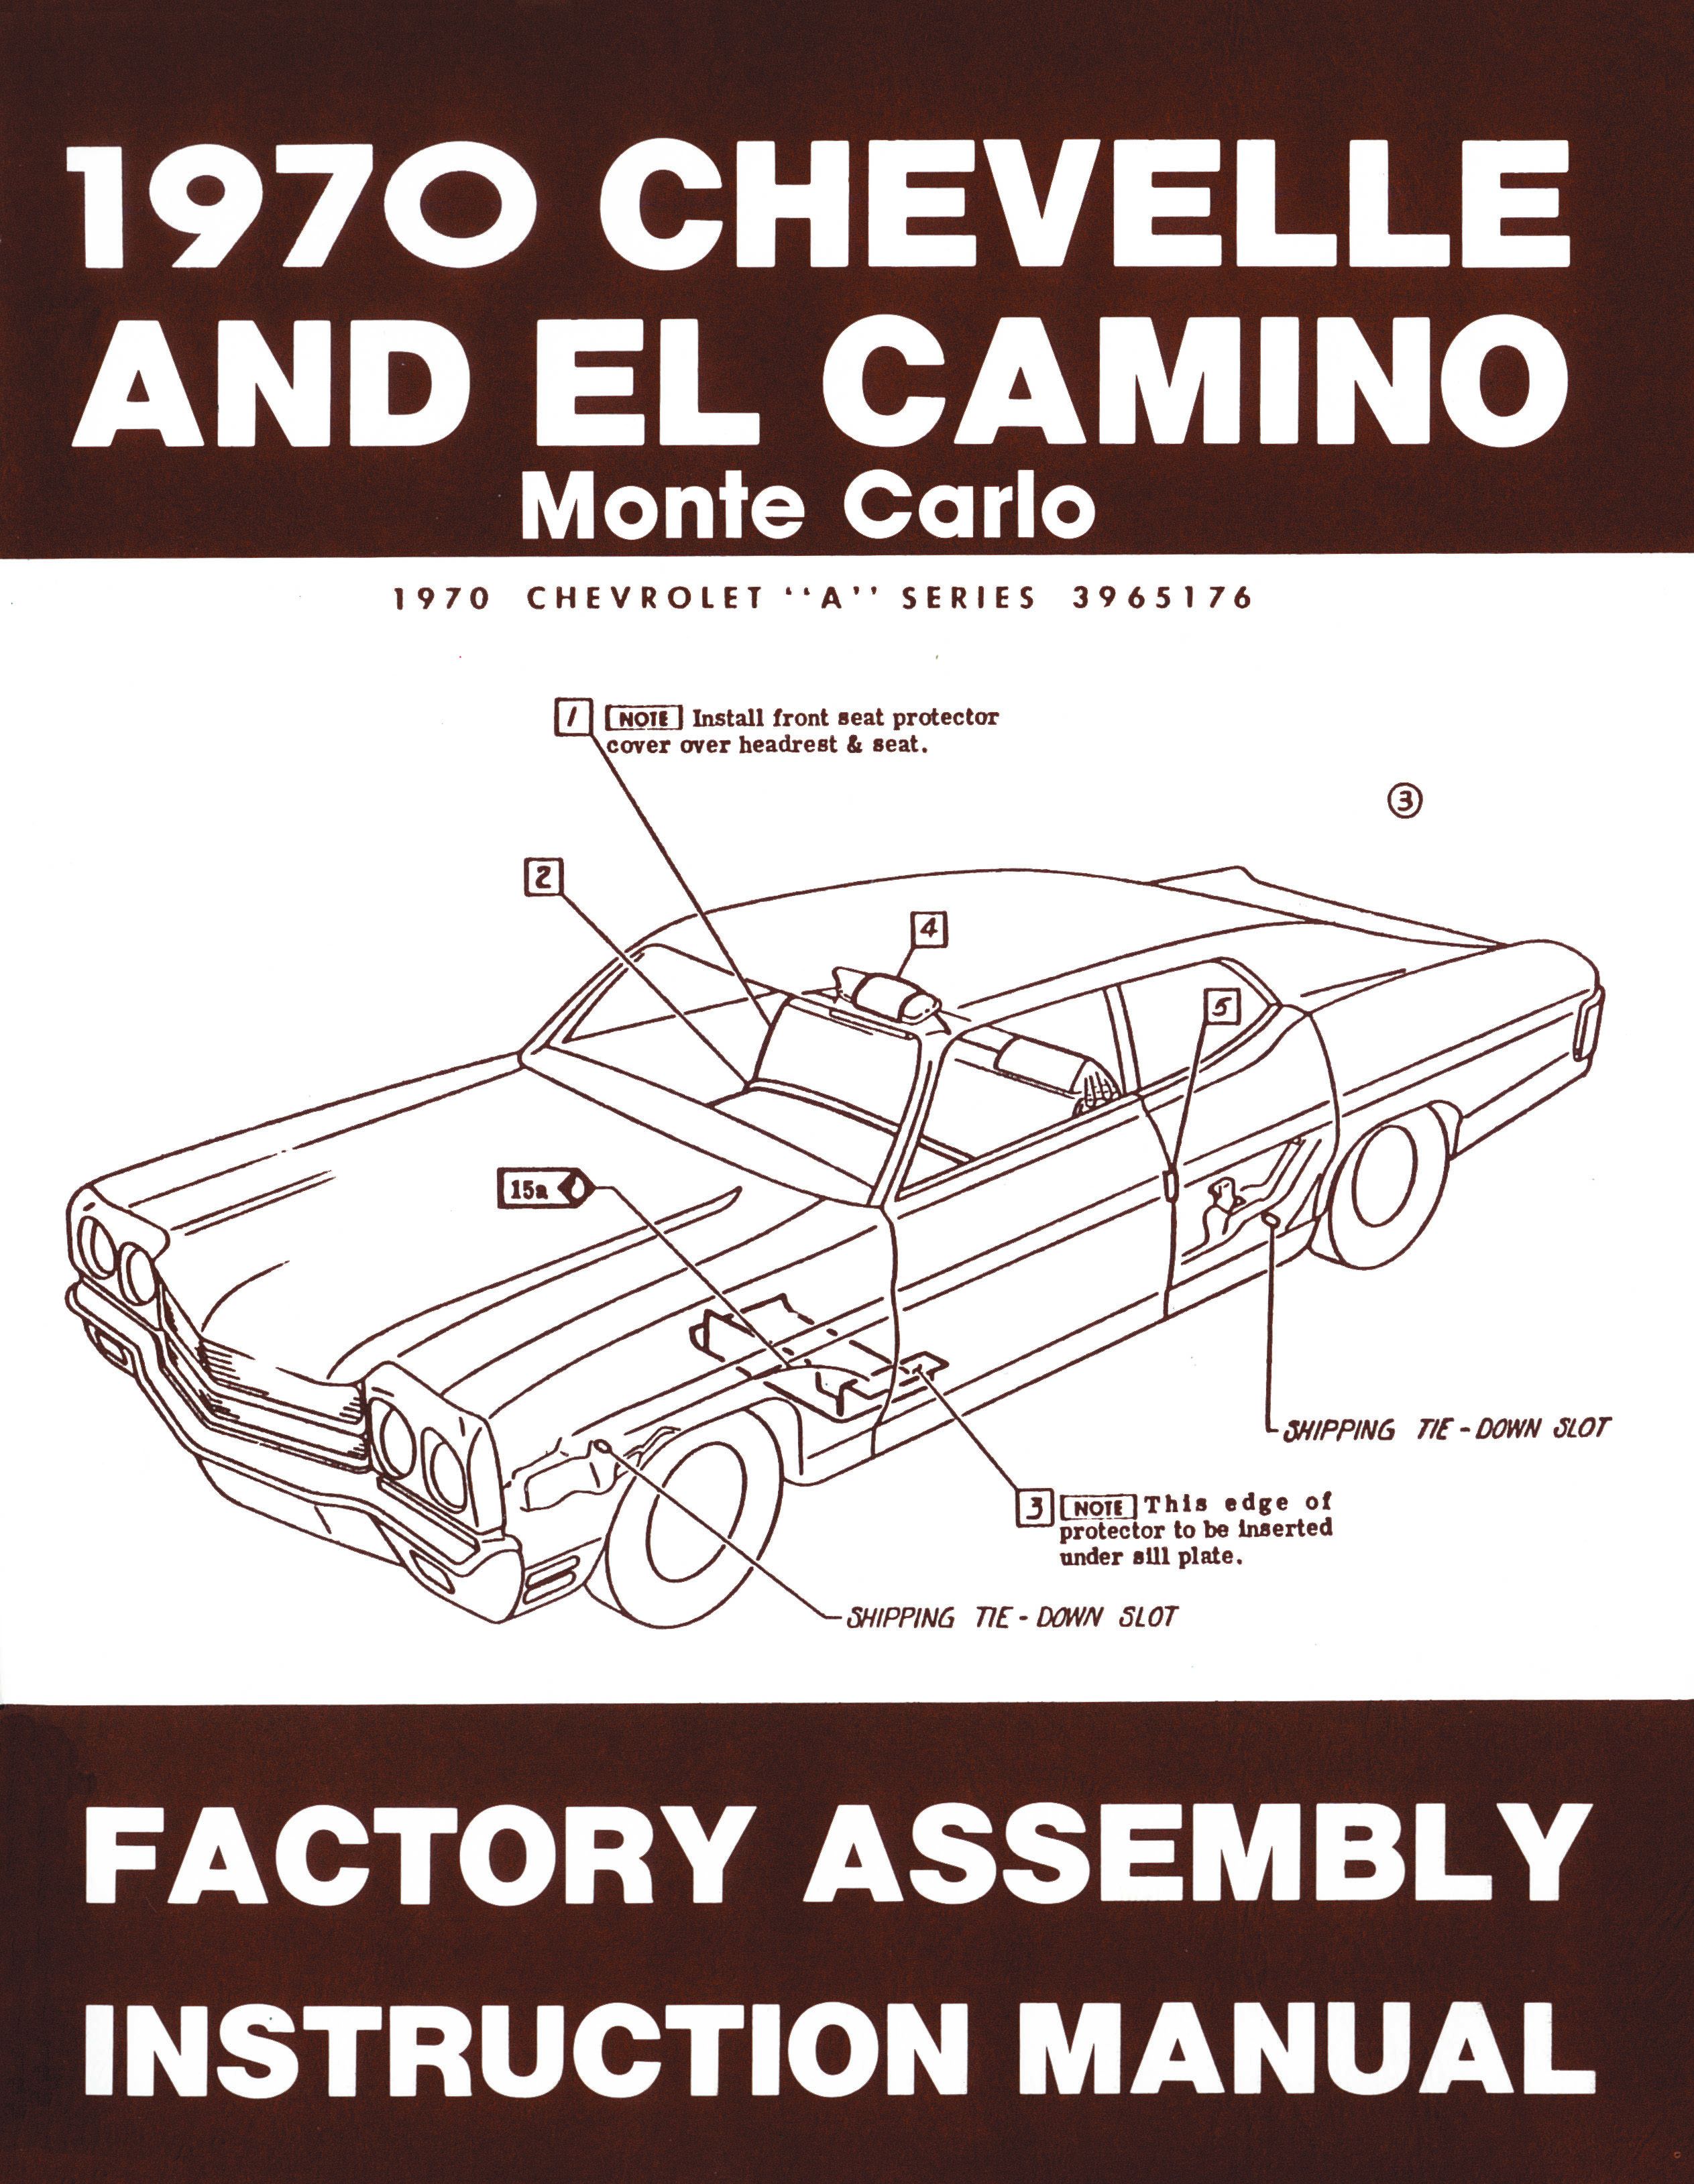 american-autowire, Factory Assembly Manual - 1970 Chevelle